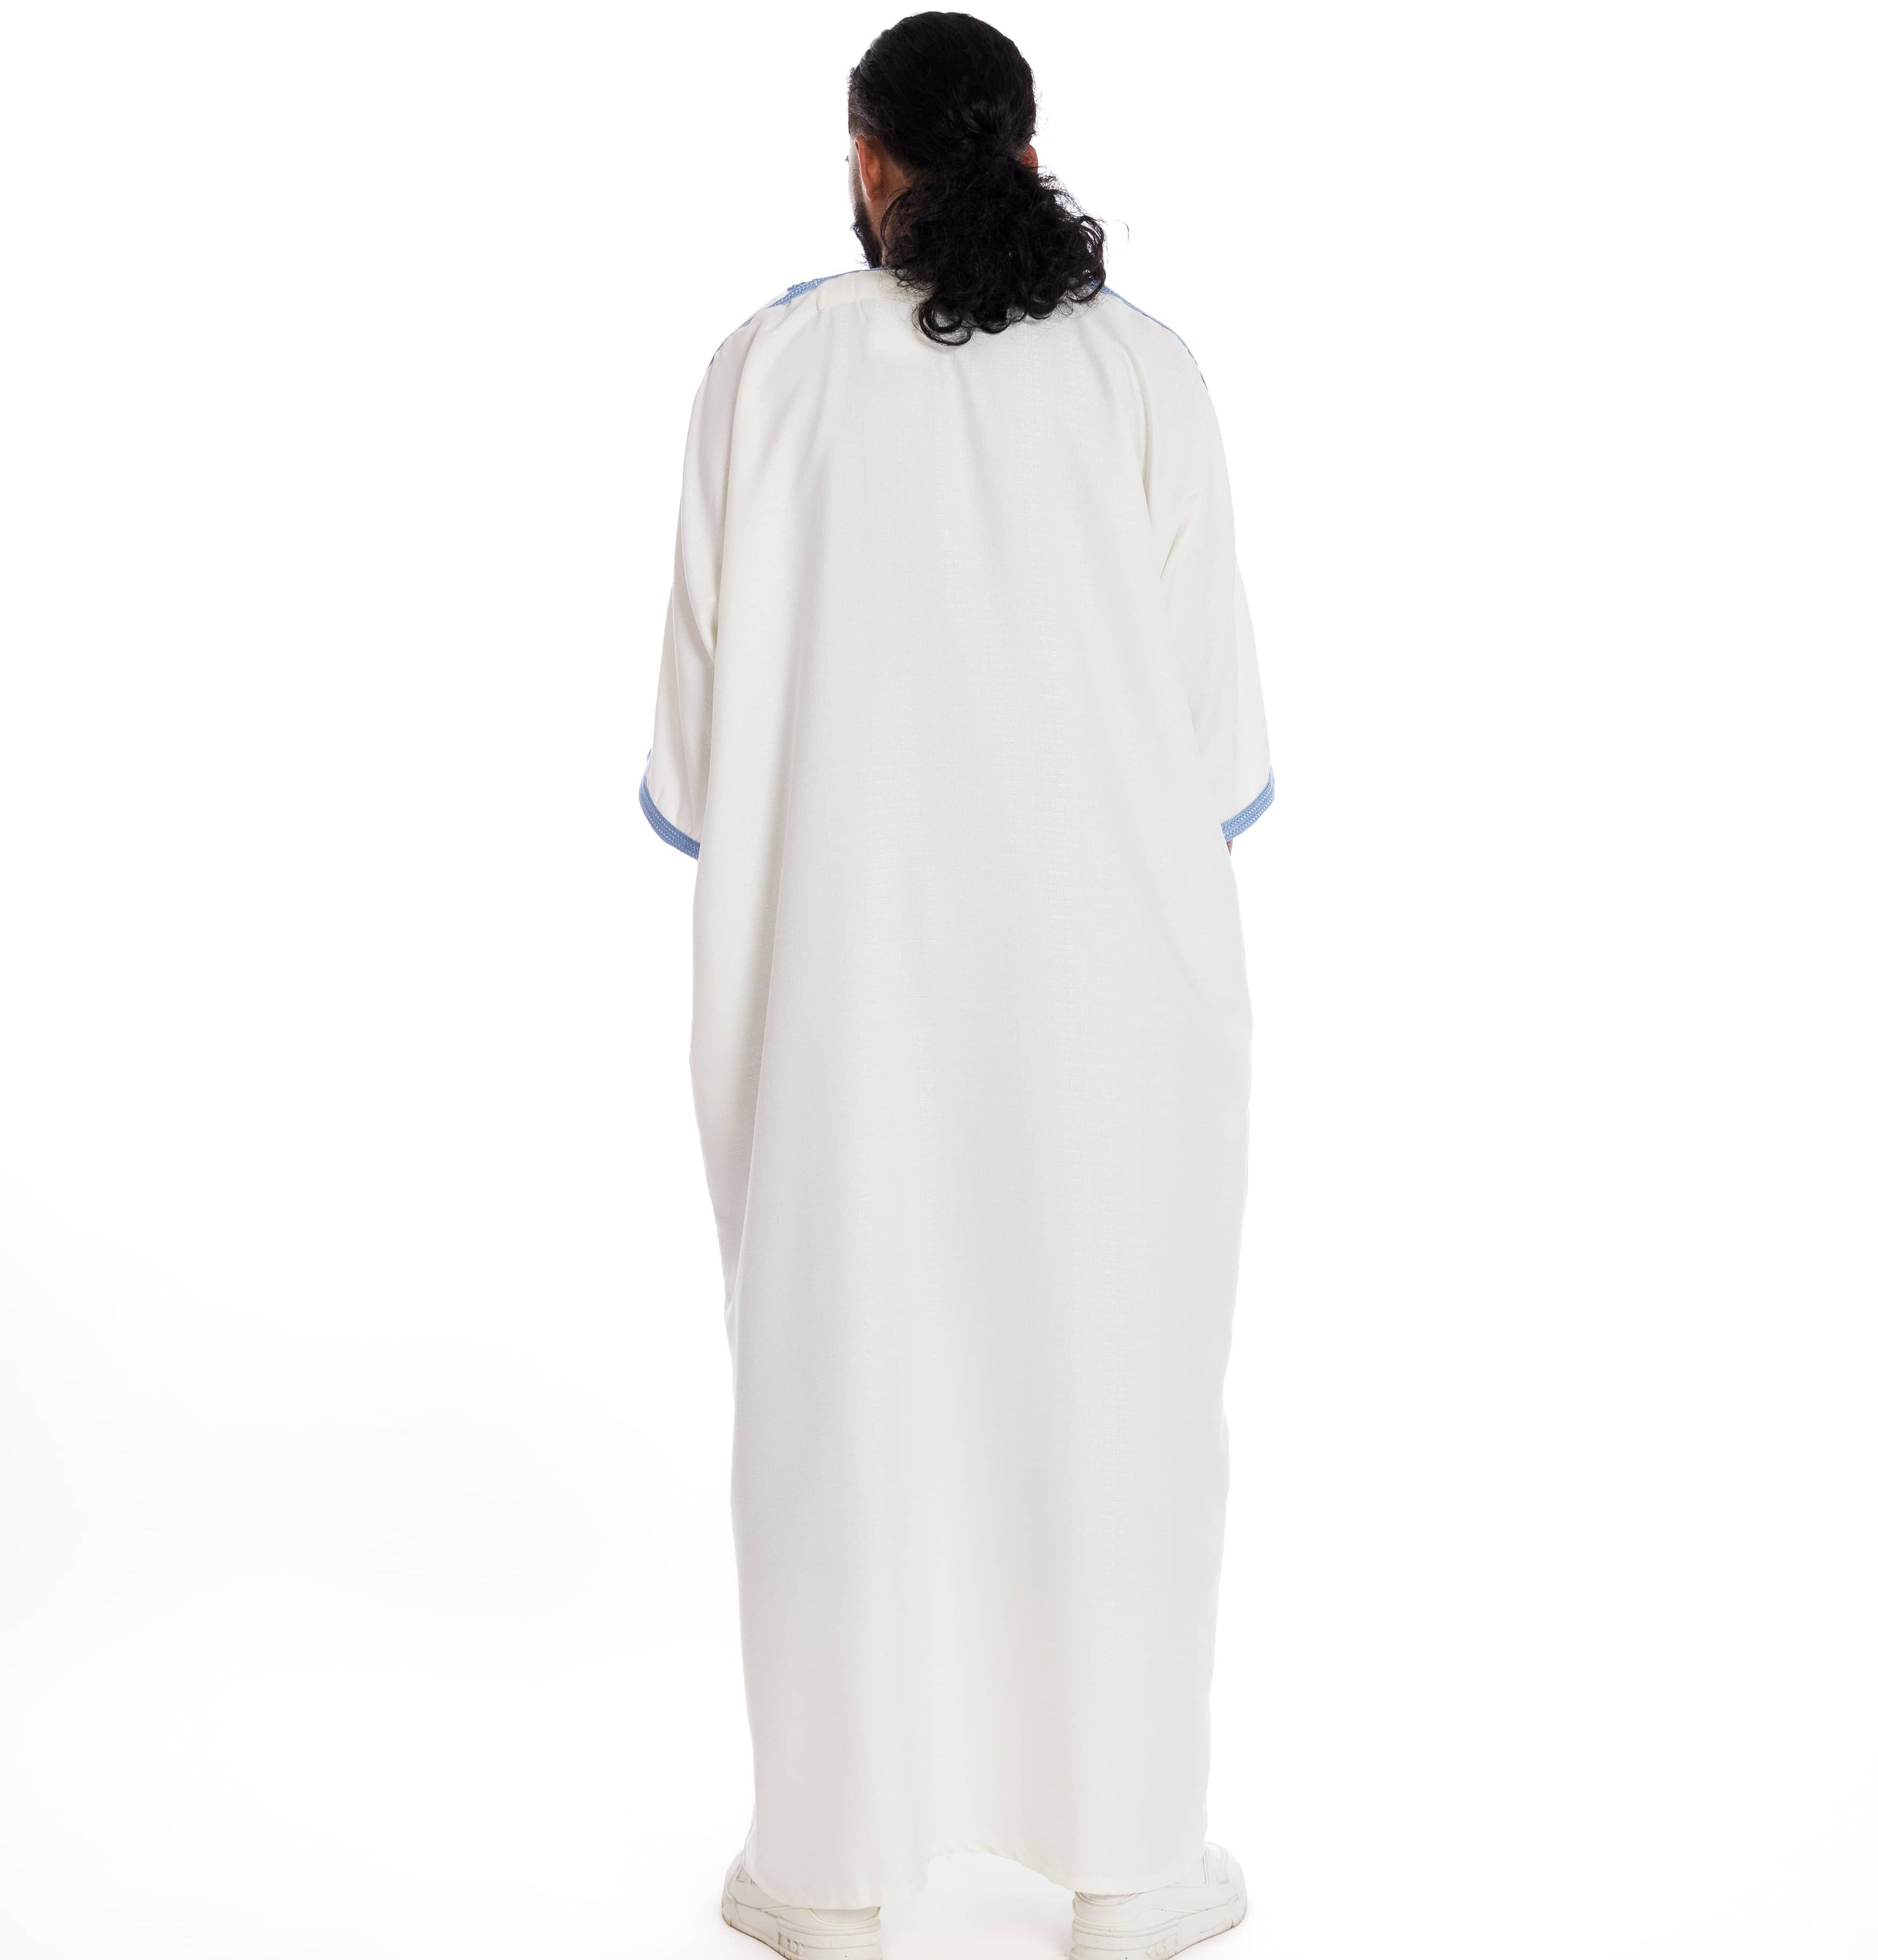 White and blue Essential linen thobe Collection - newarabia Apparel &amp; Accessories